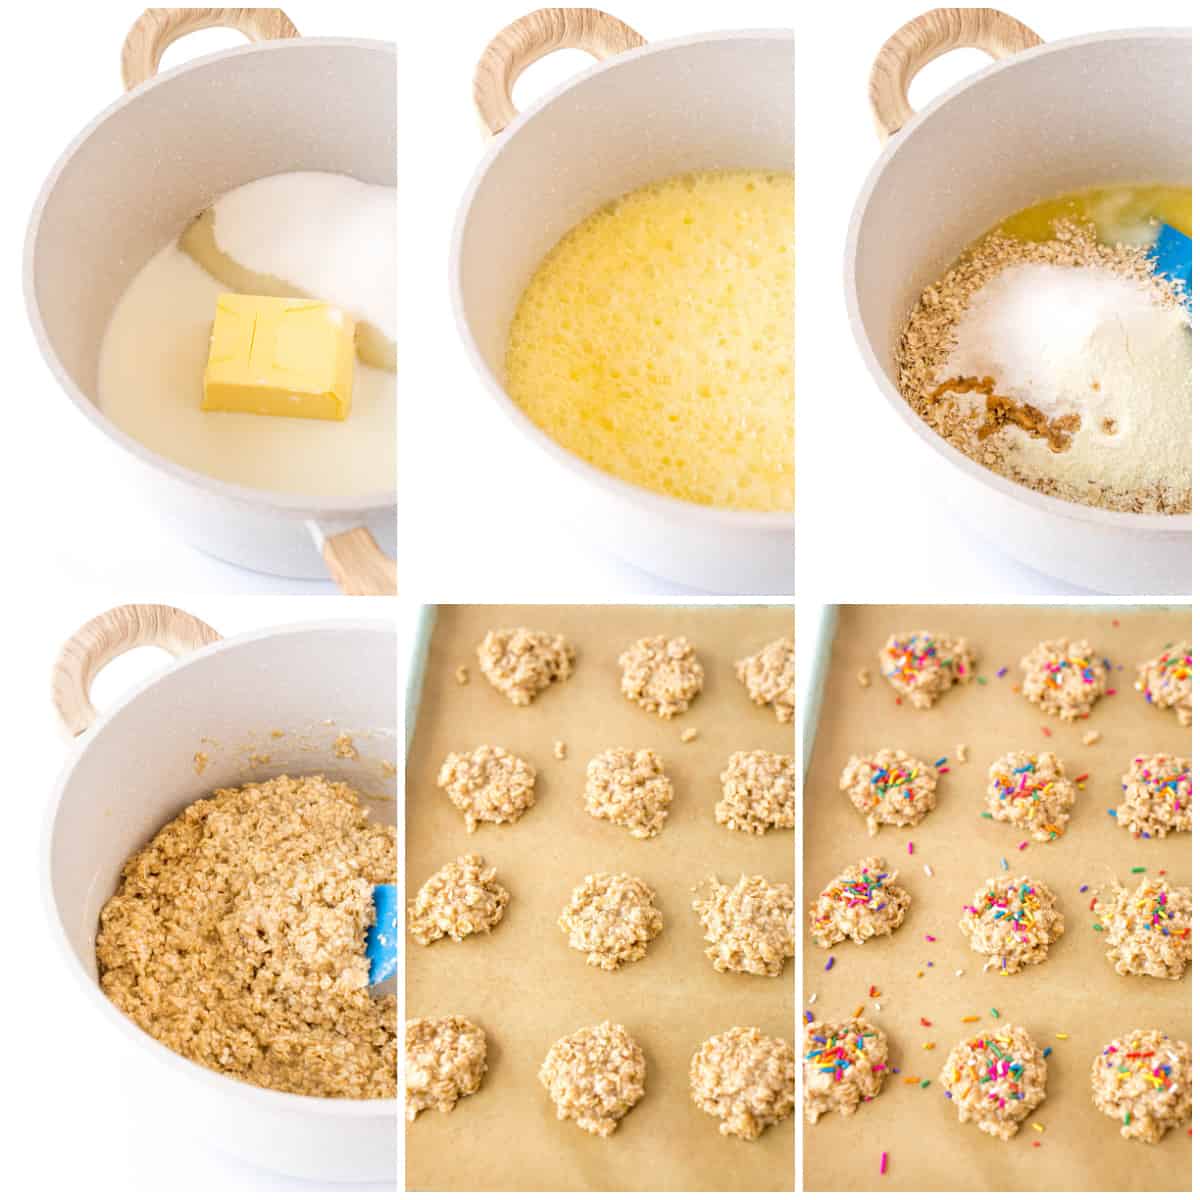 Step by step photos on how to make Vanilla No Bake Cookies.